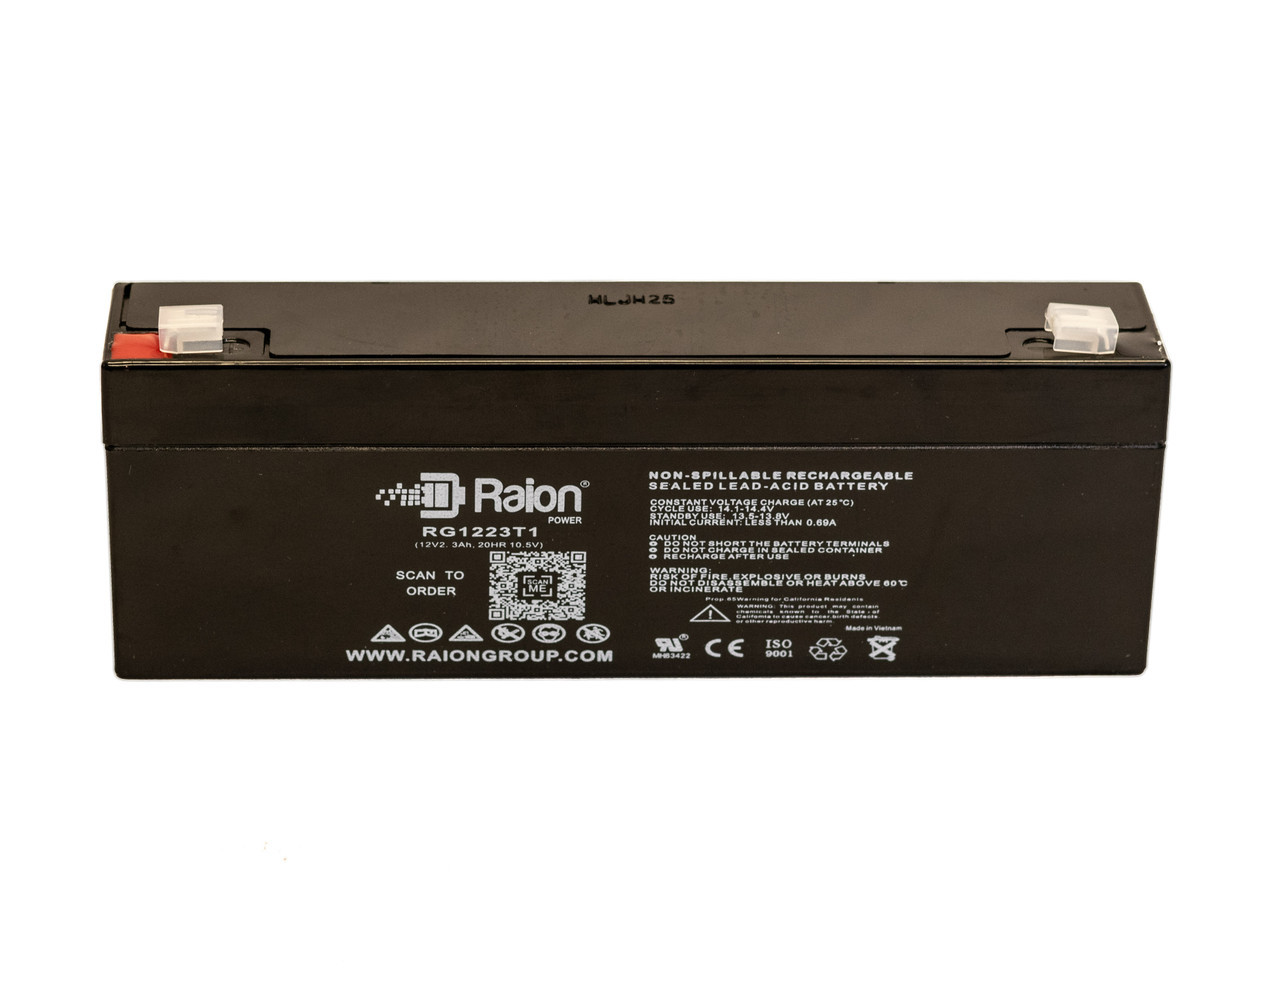 Raion Power 12V 2.3Ah SLA Battery With T1 Terminals For Baxter Healthcare AS 5B Auto Syringe